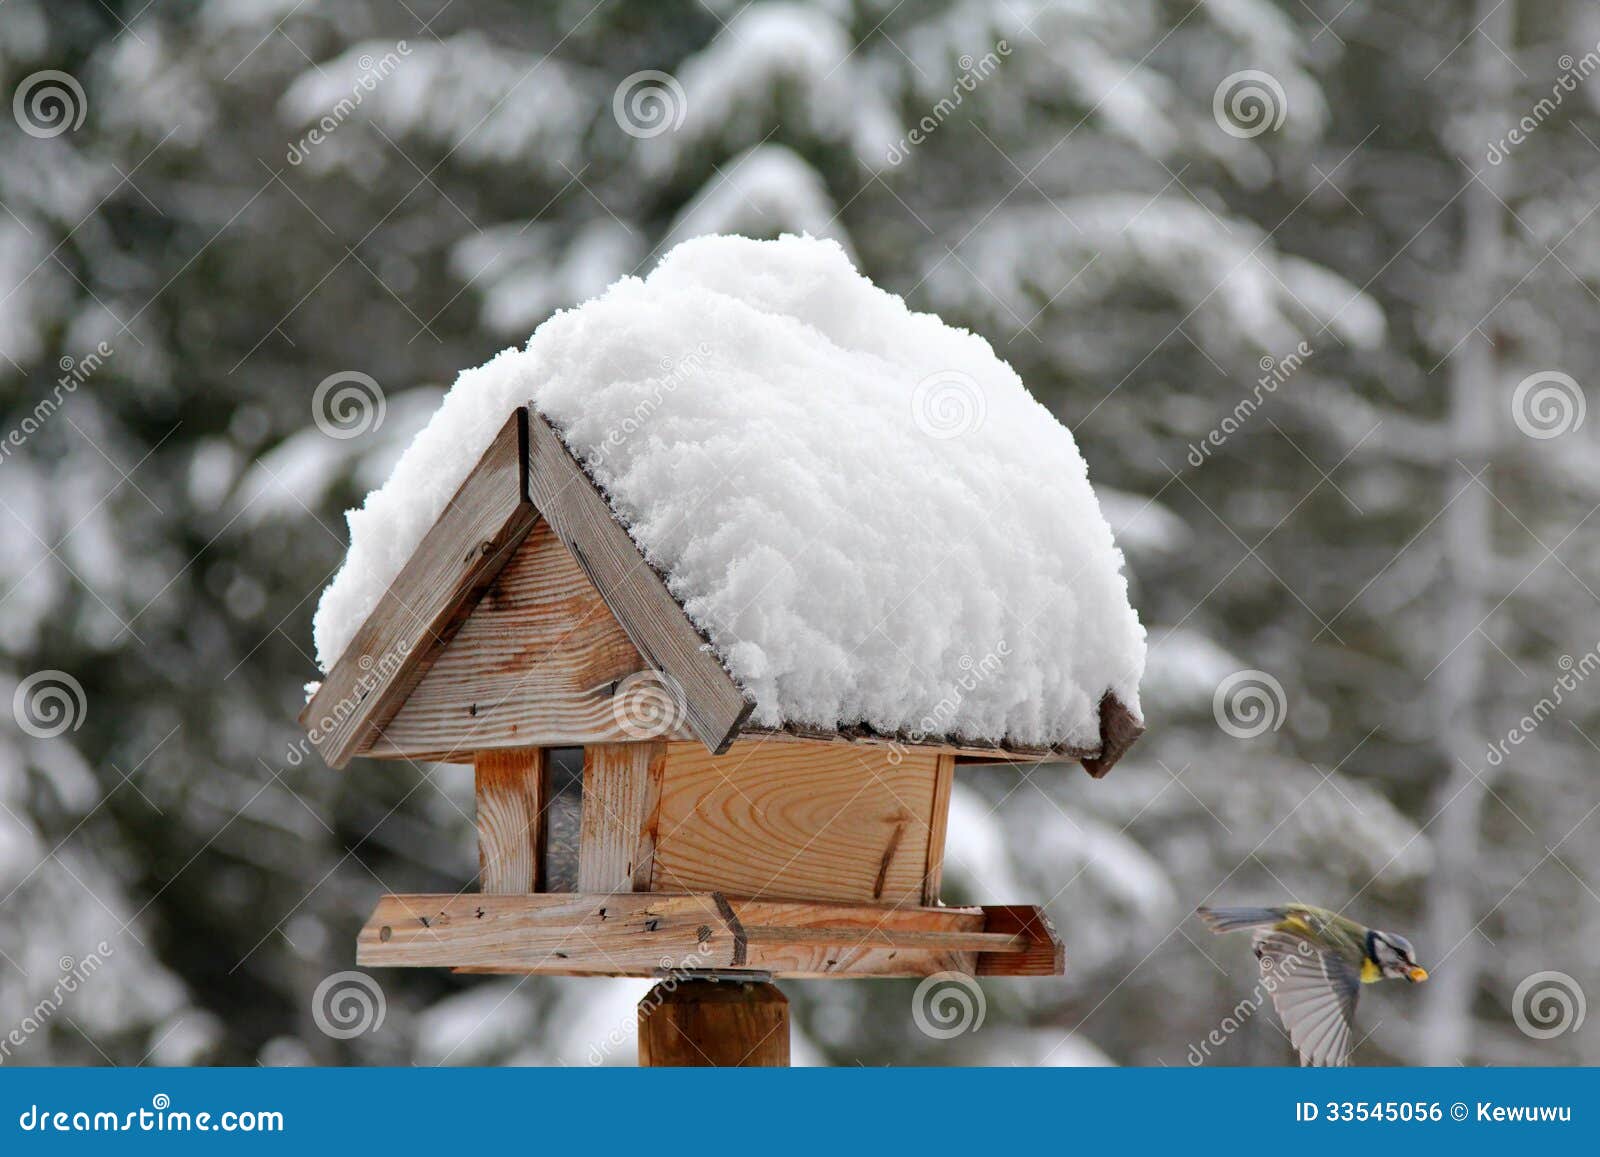 bird with sunflower seed flying from a wooden bird feeder with snow 